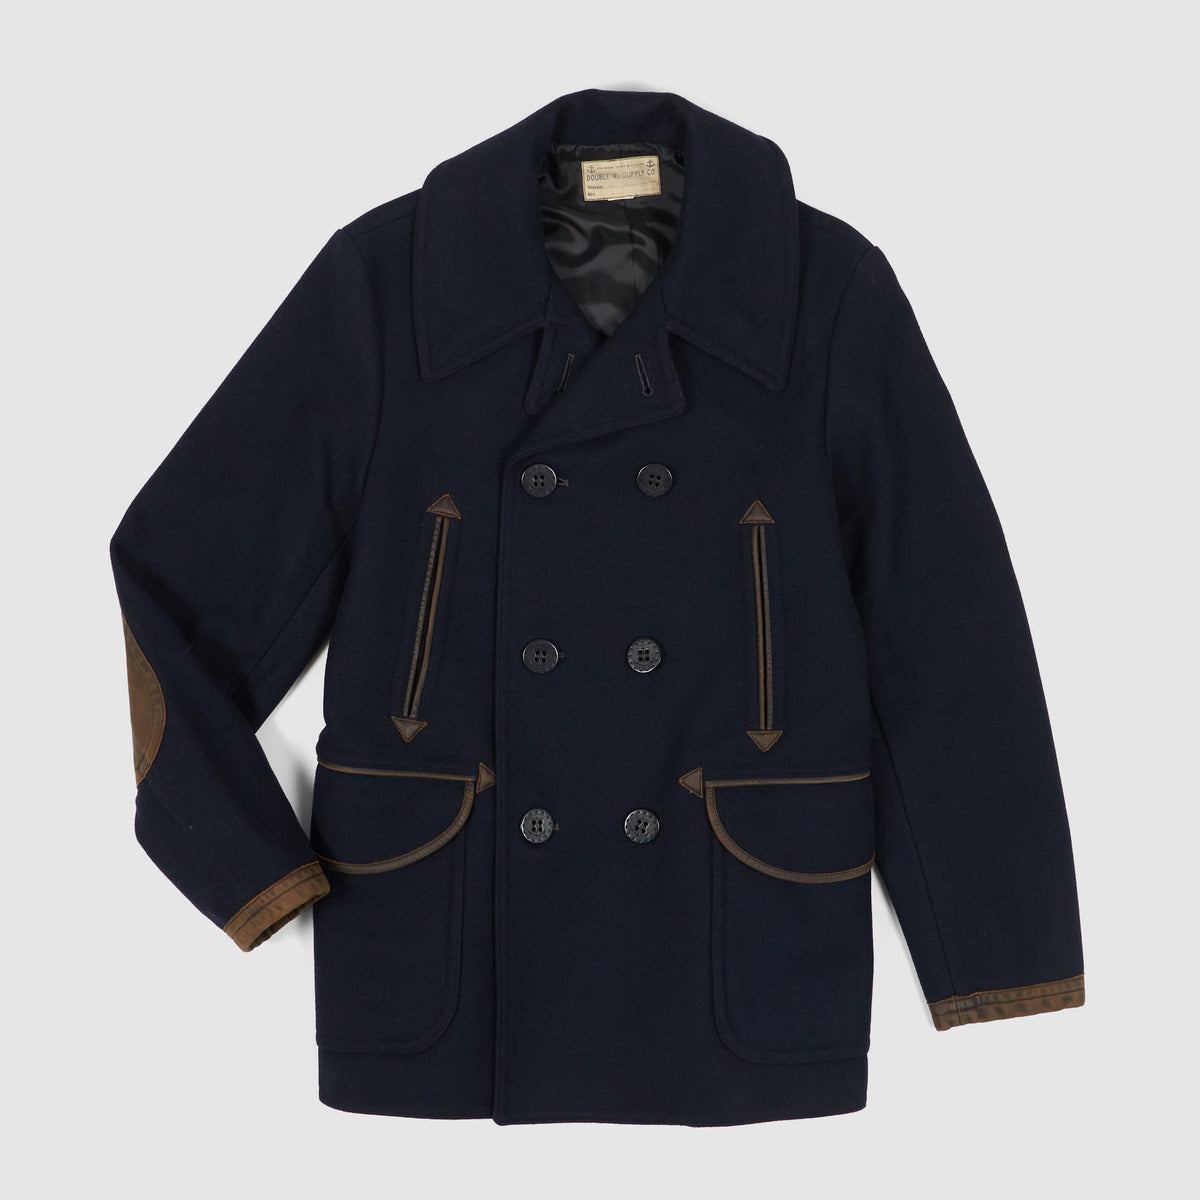 Double RL Wool Leather-Trim Peacoat